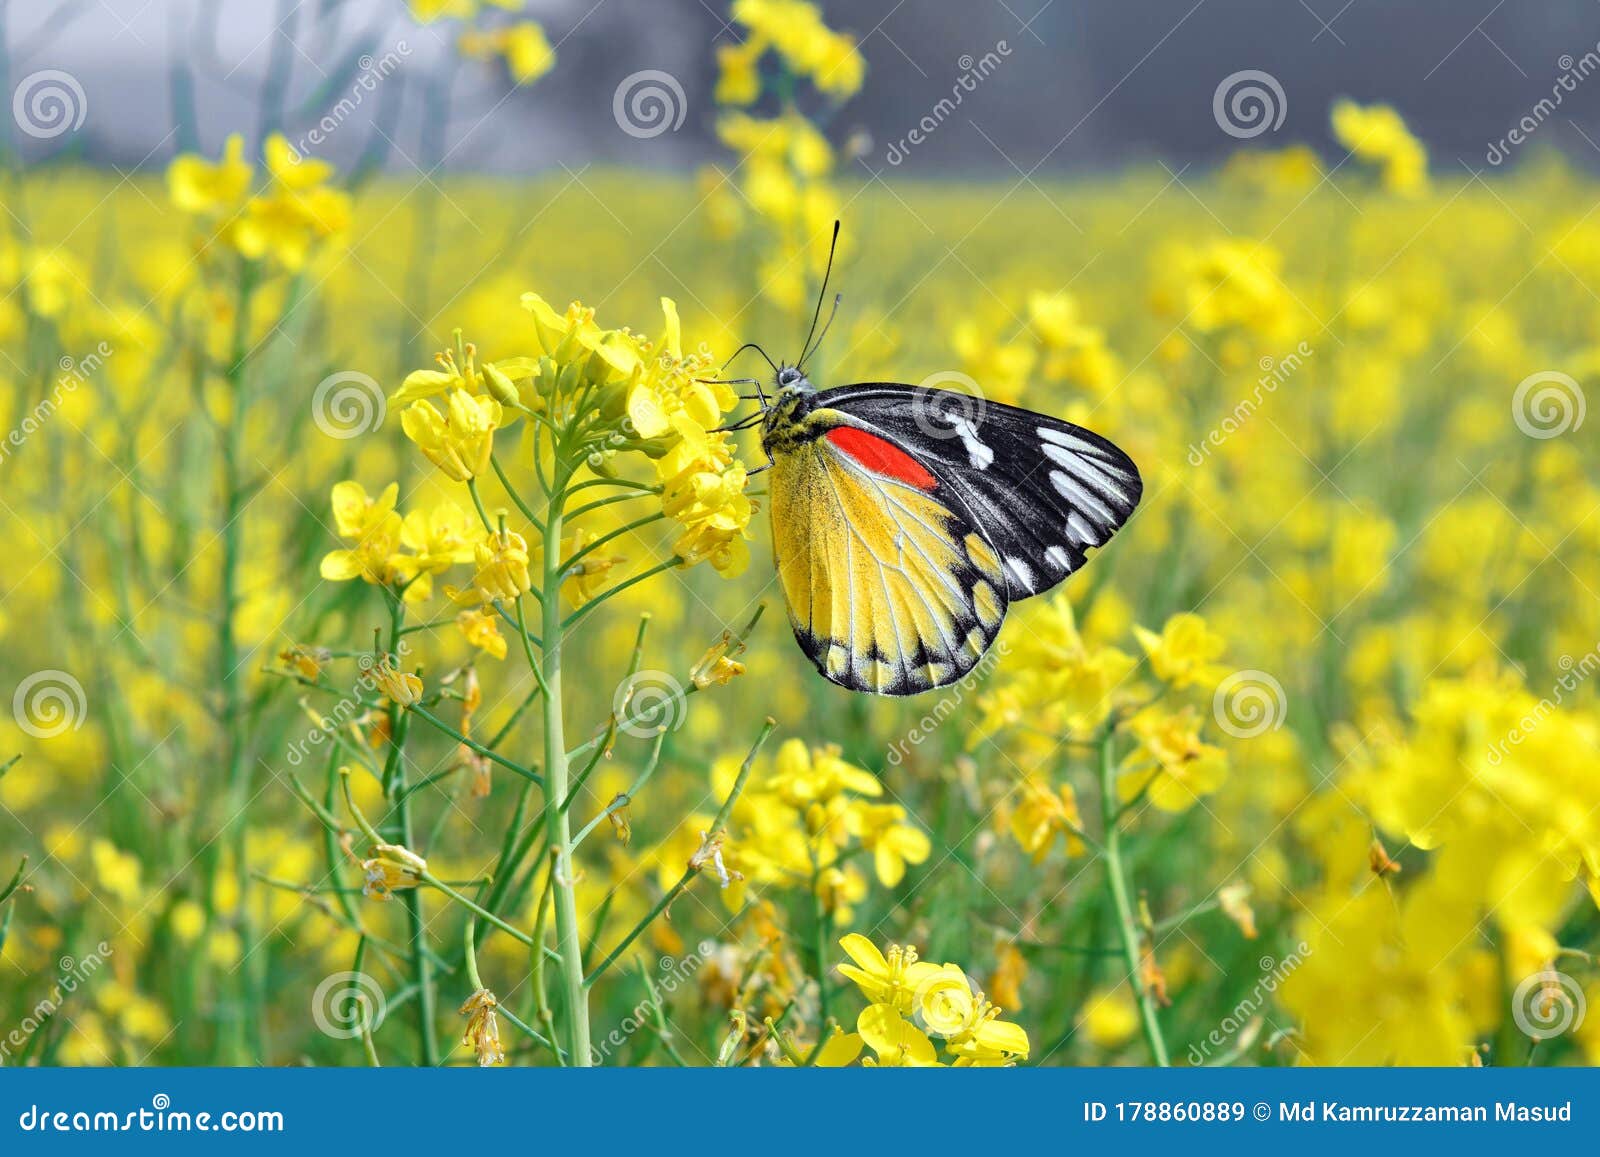 Beautiful Butterfly in Nature, is a Nice Insect Stock Image - Image of flowers, long: 178860889